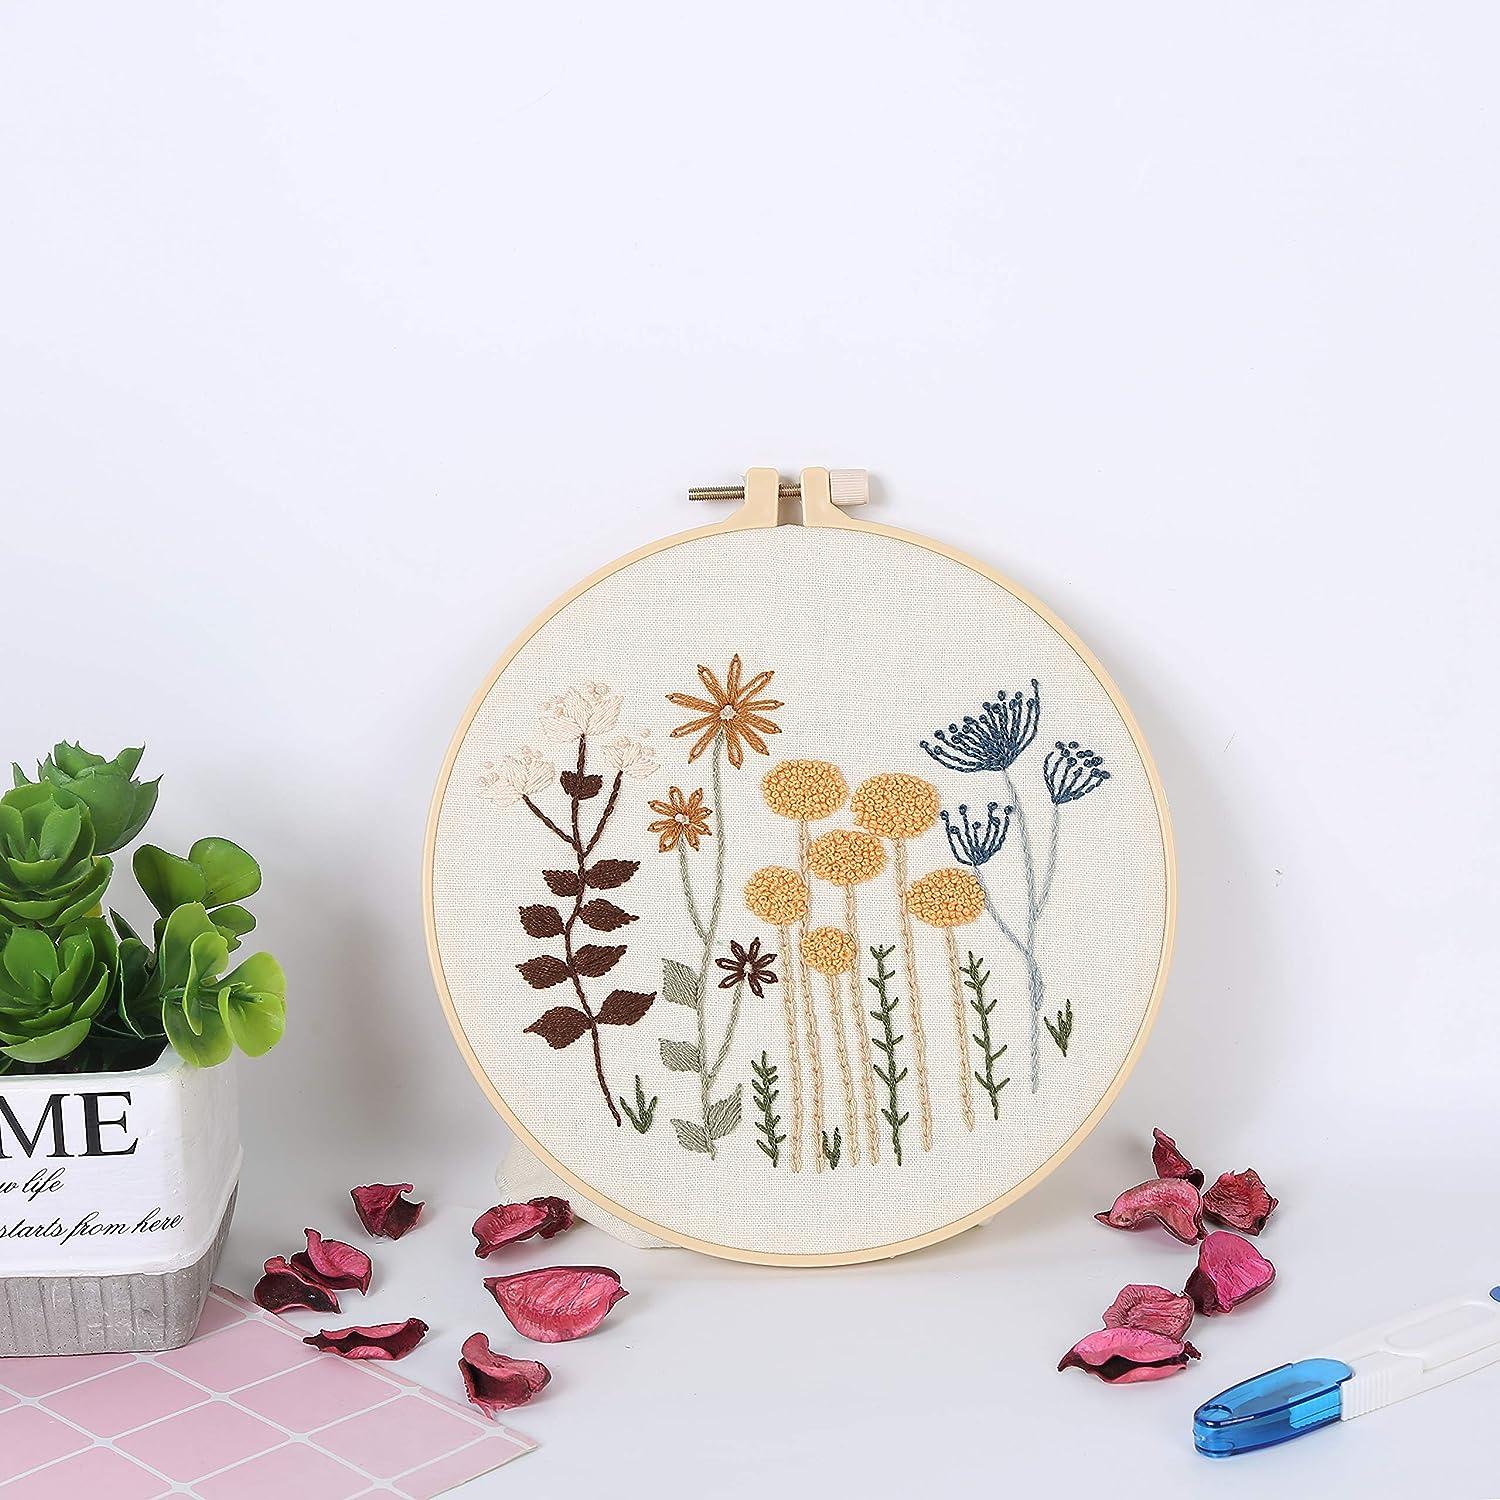  ZENSTORE 3 Sets Embroidery Kit For Beginners Adults - 3 Plastic  Hoops And 3 Flowers Hand Embroidery Patterns - Needlepoint Kits For Adults  - Easy Cross Stitch Kits For Beginner - Floral Embroidery Kit